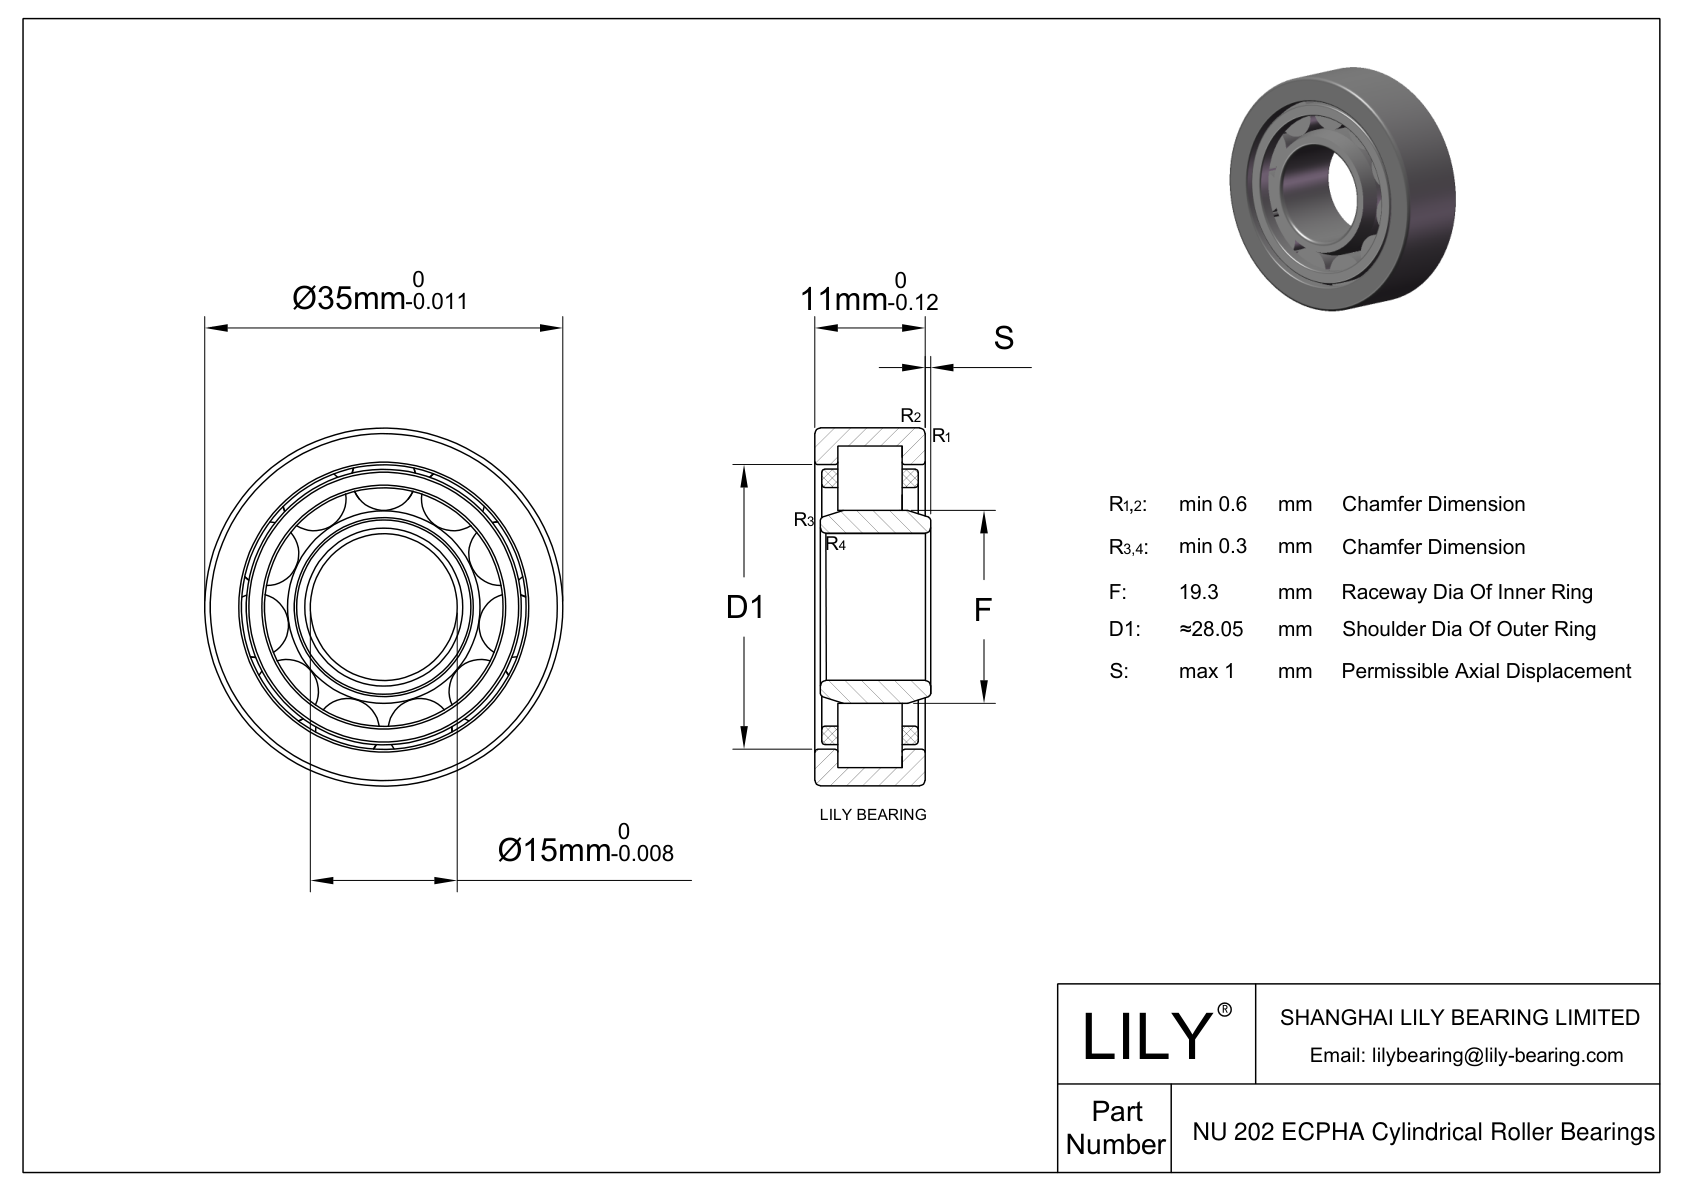 NU 202 ECPHA Single Row Cylindrical Roller Bearings With Inner Ring cad drawing